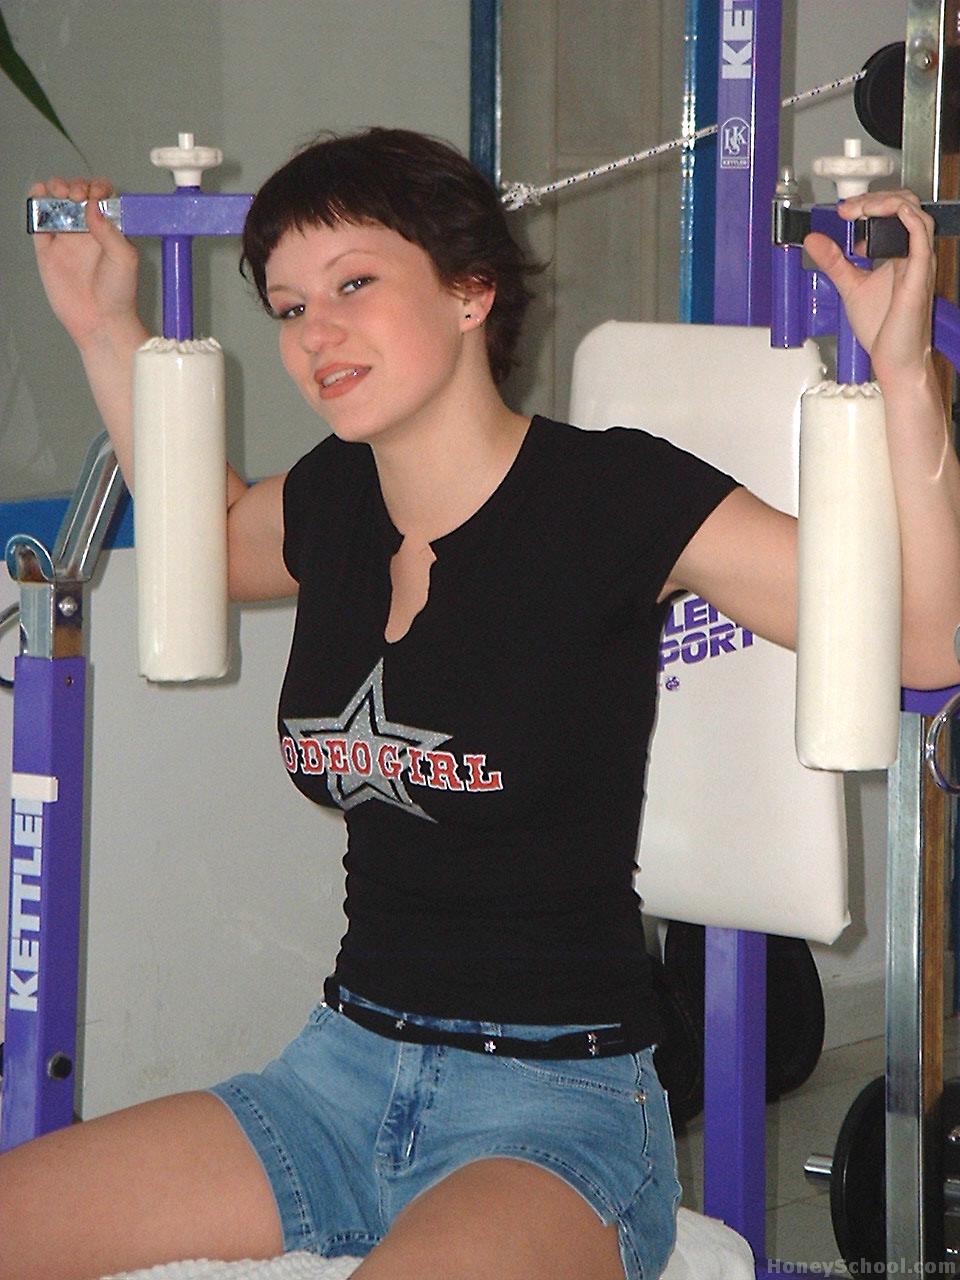 Big titted teen sports short hair while getting naked during a working out 포르노 사진 #428604860 | Honey School Pics, Sports, 모바일 포르노